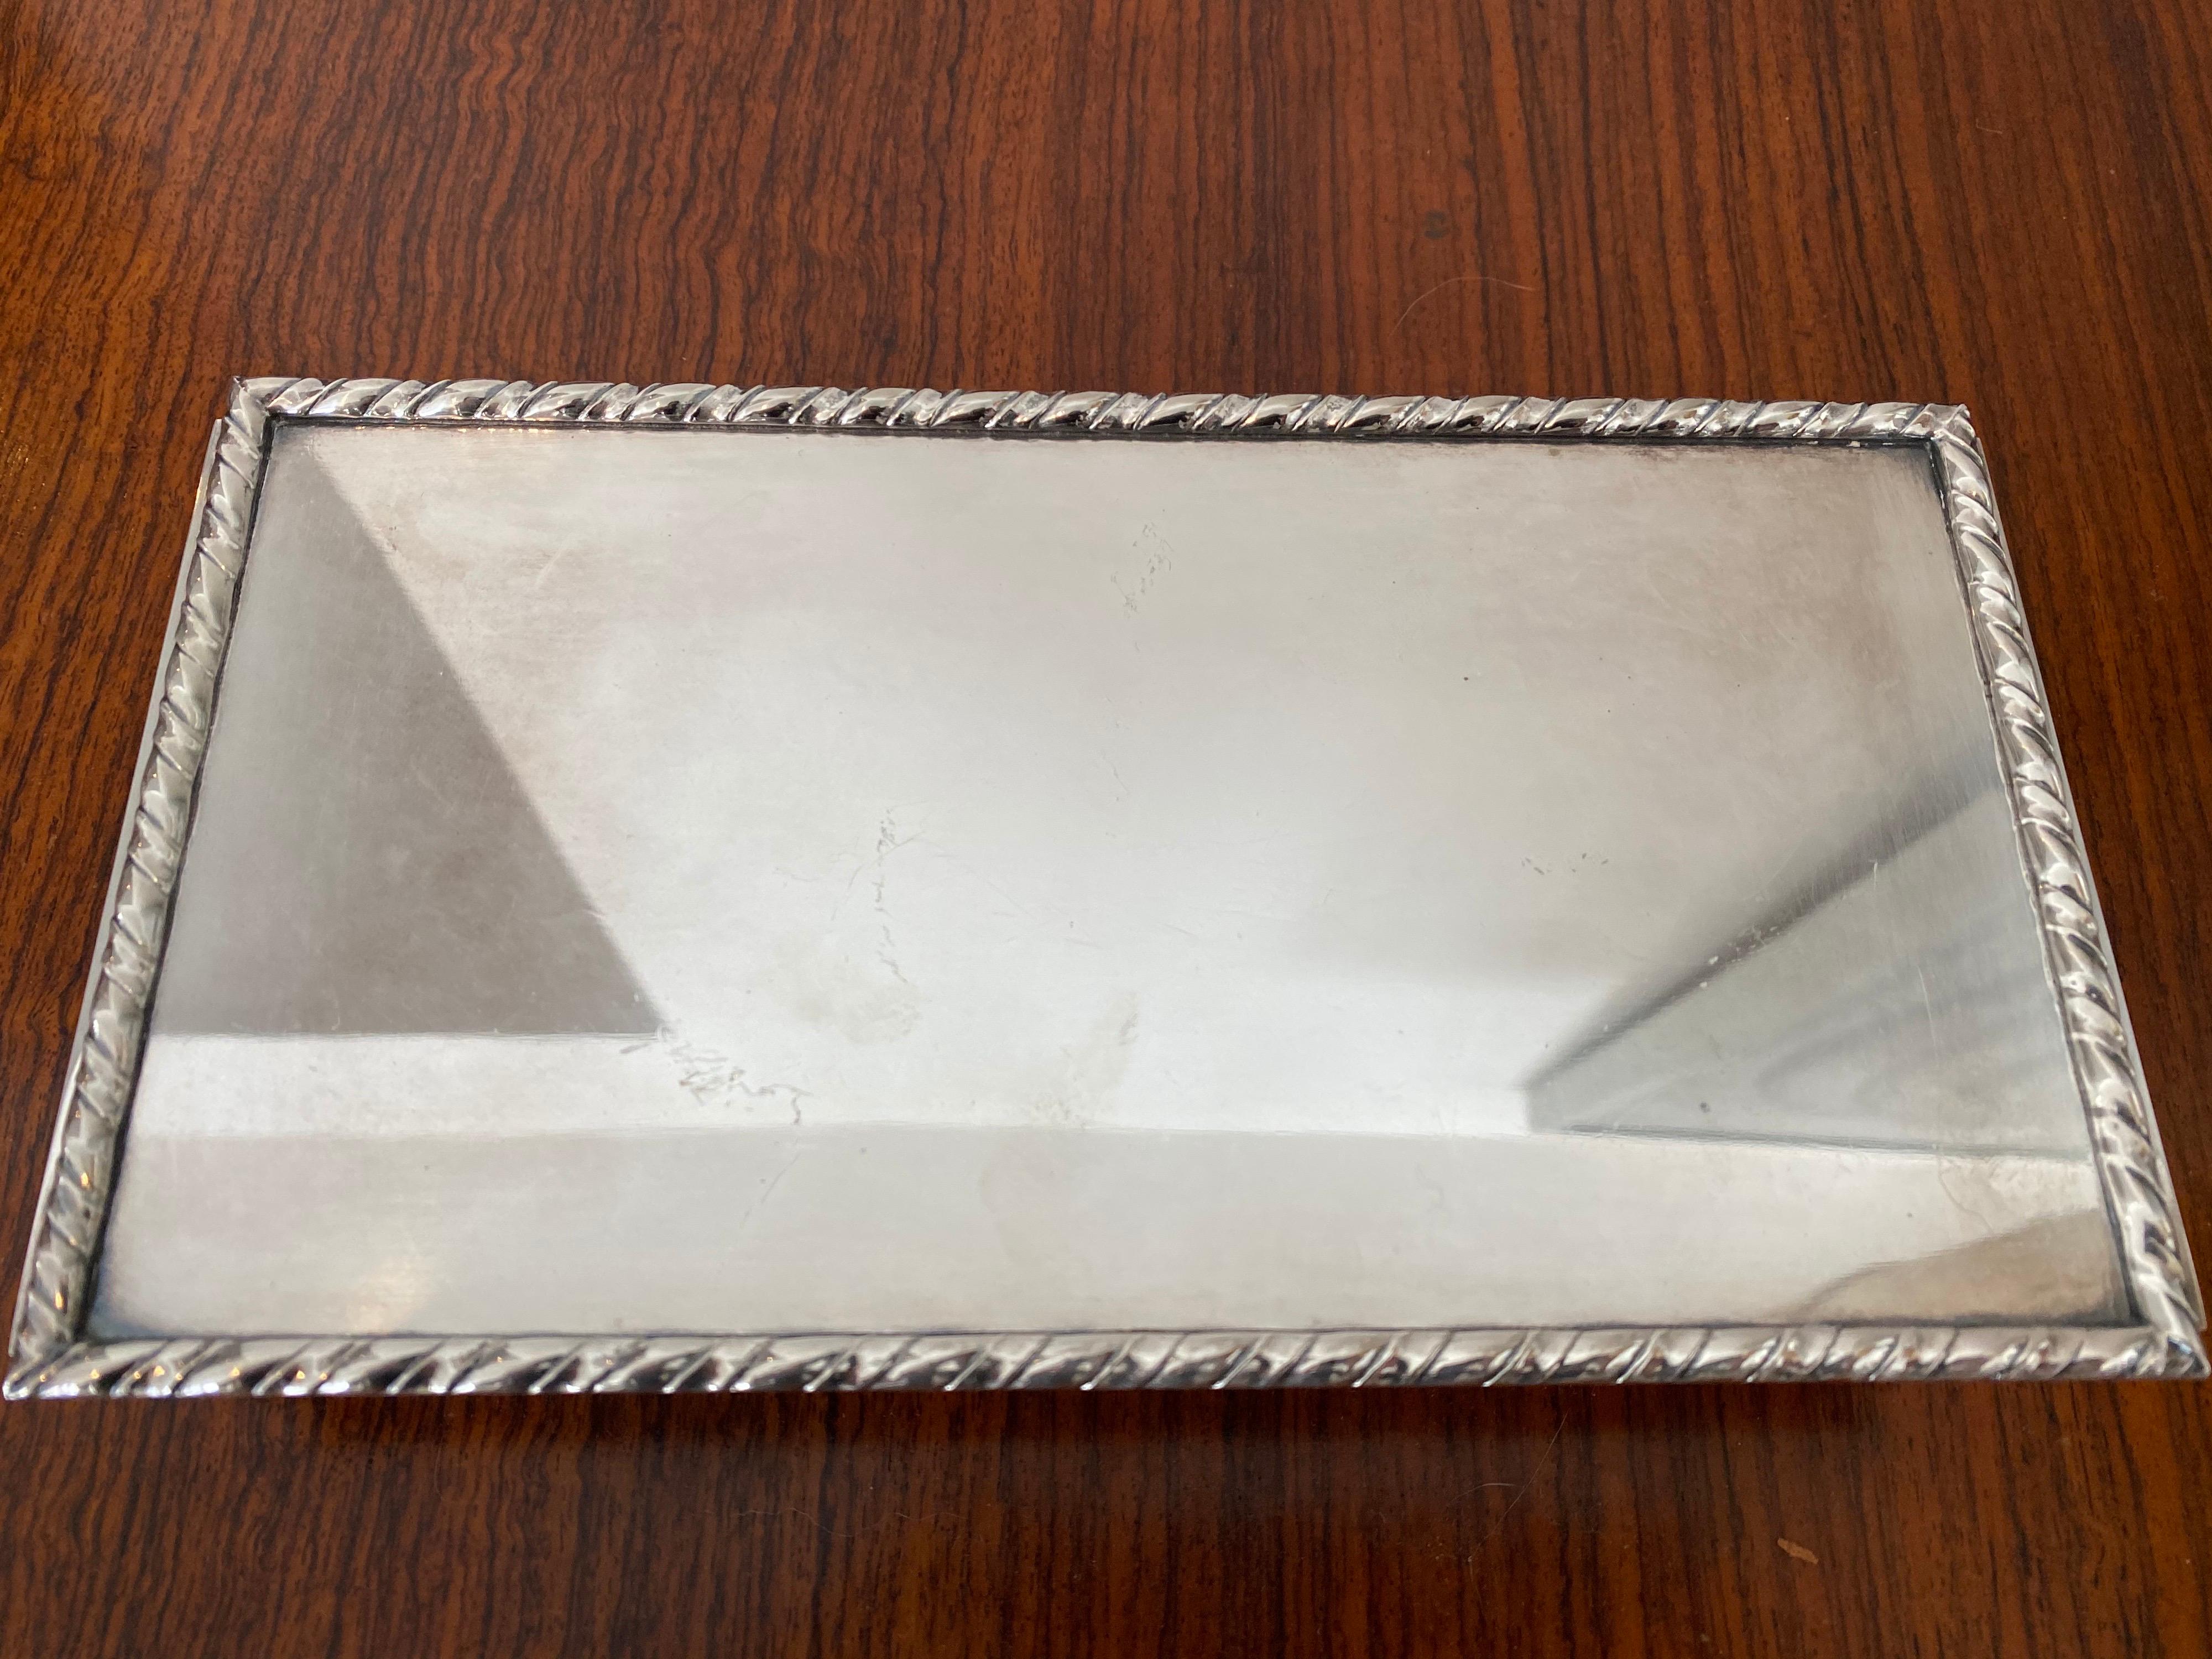 A deco style silver plate box. Interested riveted and heavy construction with concave base interior. Marked 